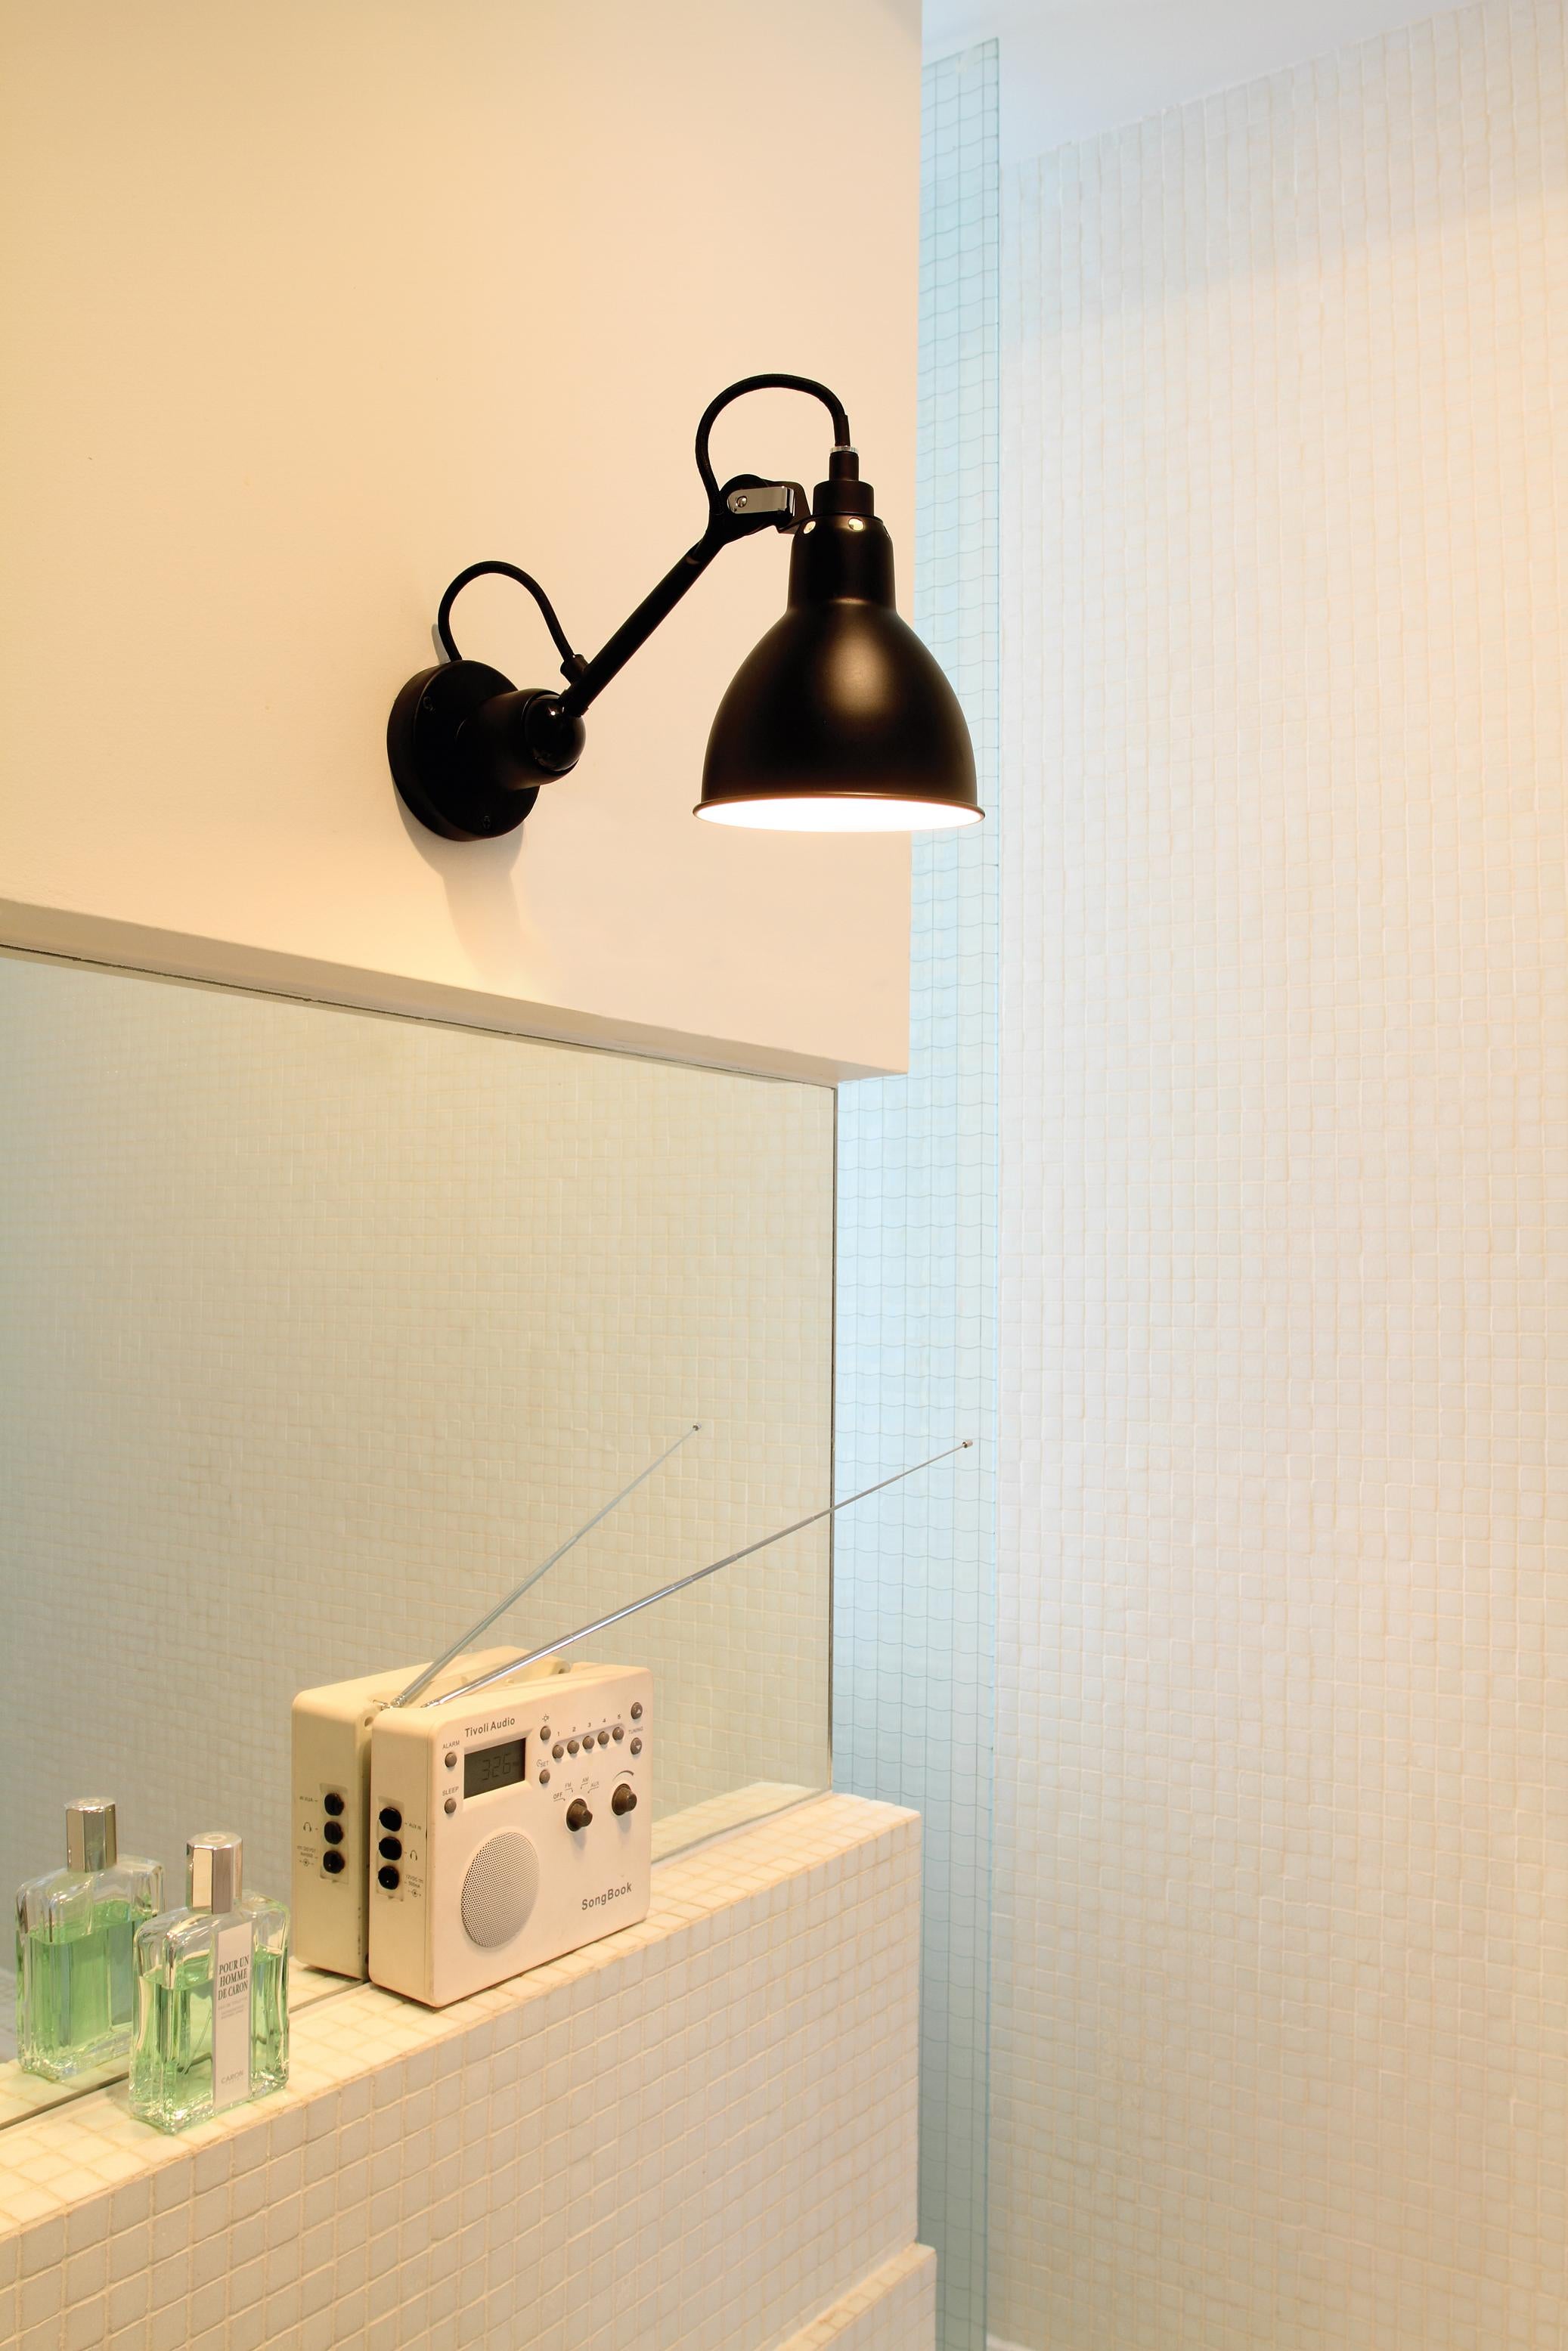 Black lampe Gras N° 304 wall lamp by Bernard-Albin Gras
Dimensions: D 15 x W 14 x H 14 cm
Materials: Steel
Also Available: Different colors, switch version and other shade available,

All our lamps can be wired according to each country. If